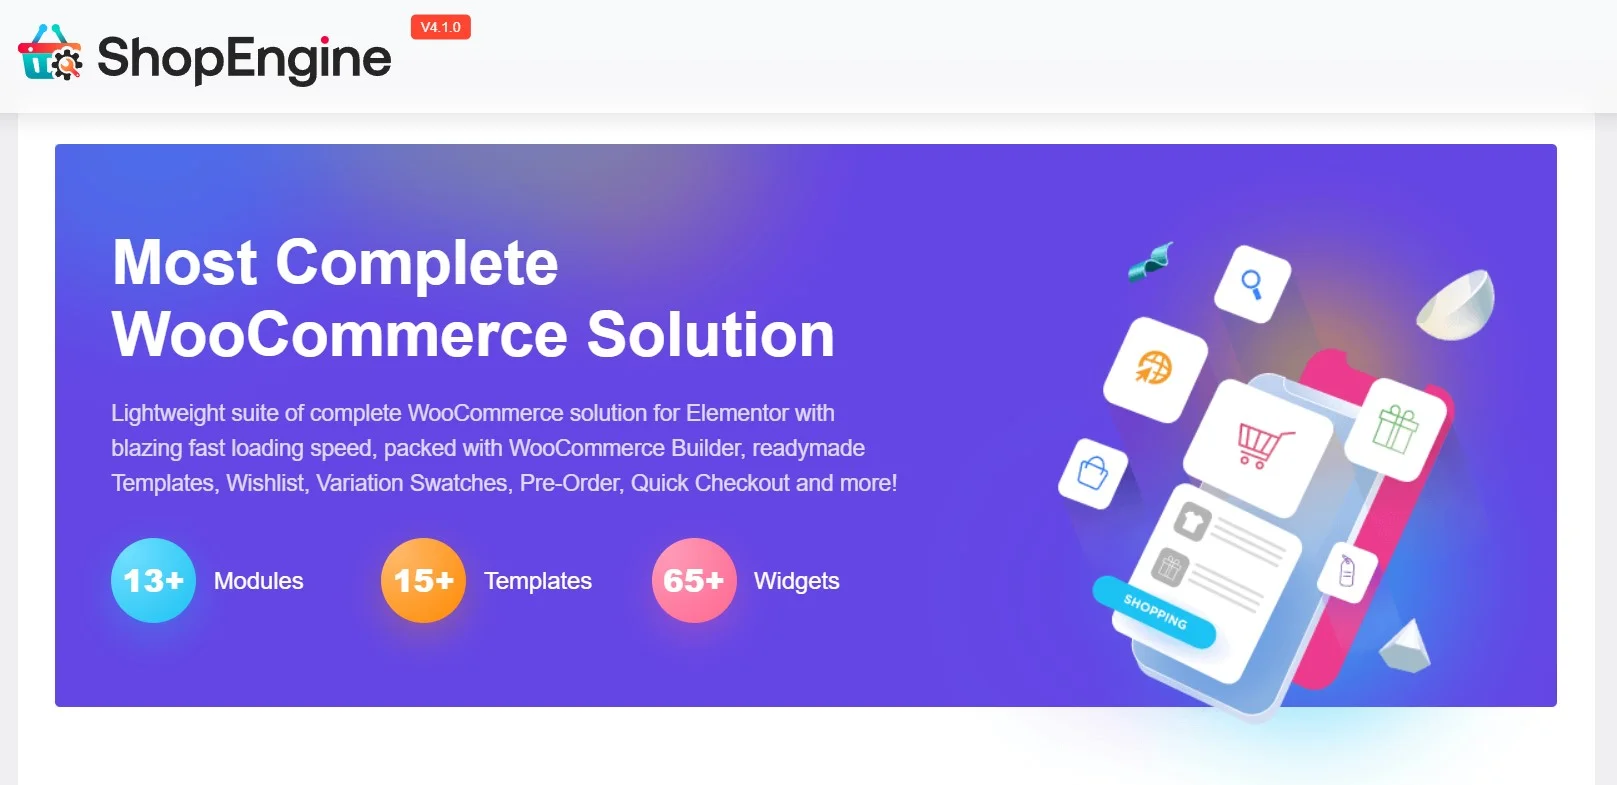 Shopengine Is The Complete Woocommerce Solution